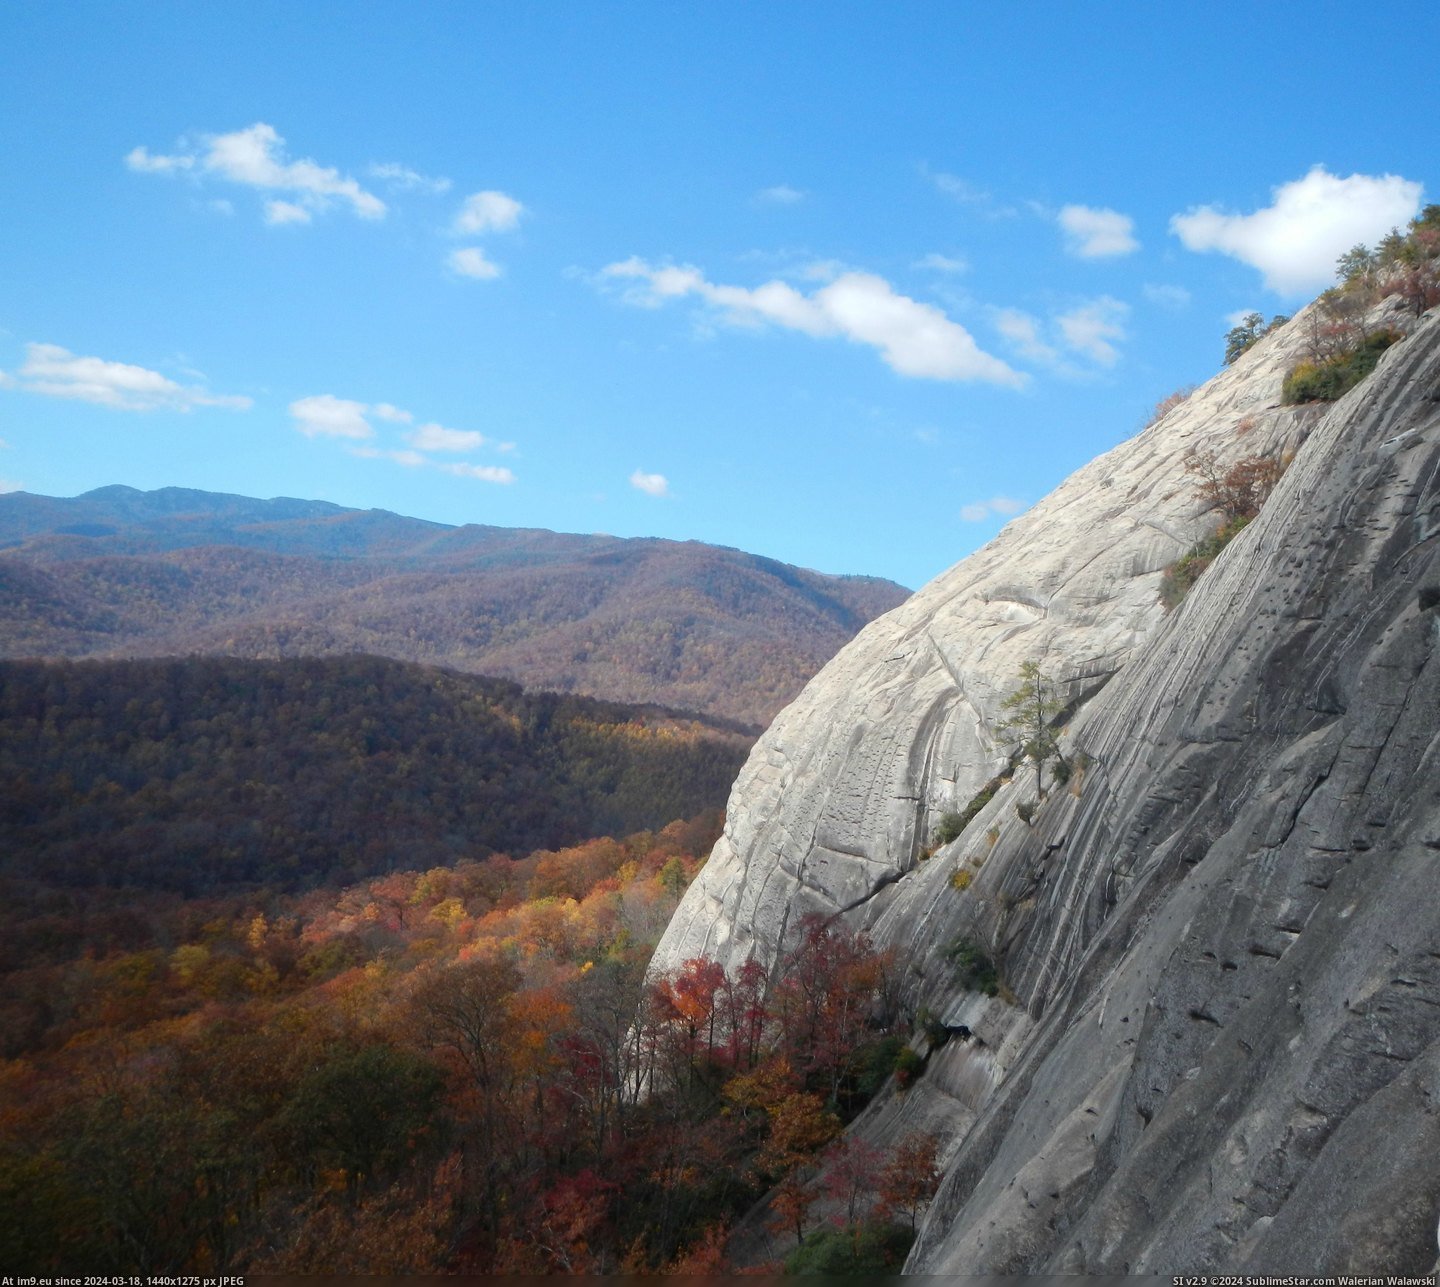 #National #Forest #Route #Climbing #Pisgah #Rock #Glass [Earthporn] From a climbing route on Looking Glass Rock: Pisgah National Forest, NC [OC] [2910x2588] Pic. (Bild von album My r/EARTHPORN favs))